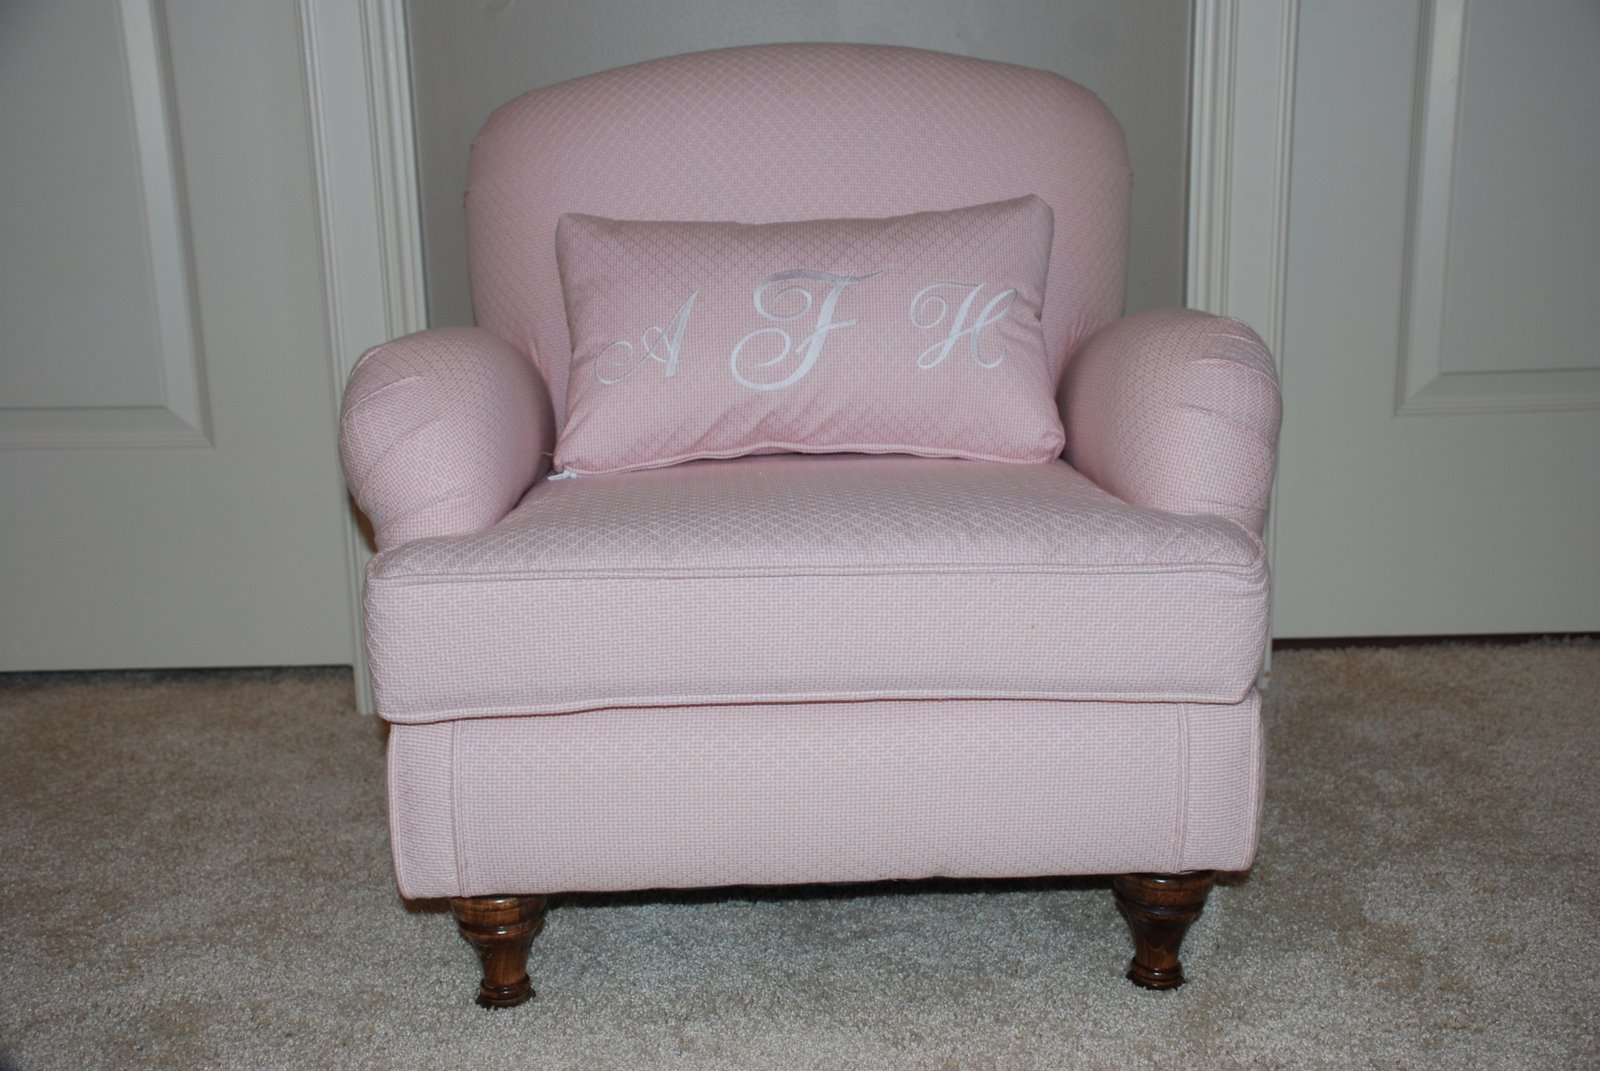 [The+Pink+Chair.JPG]